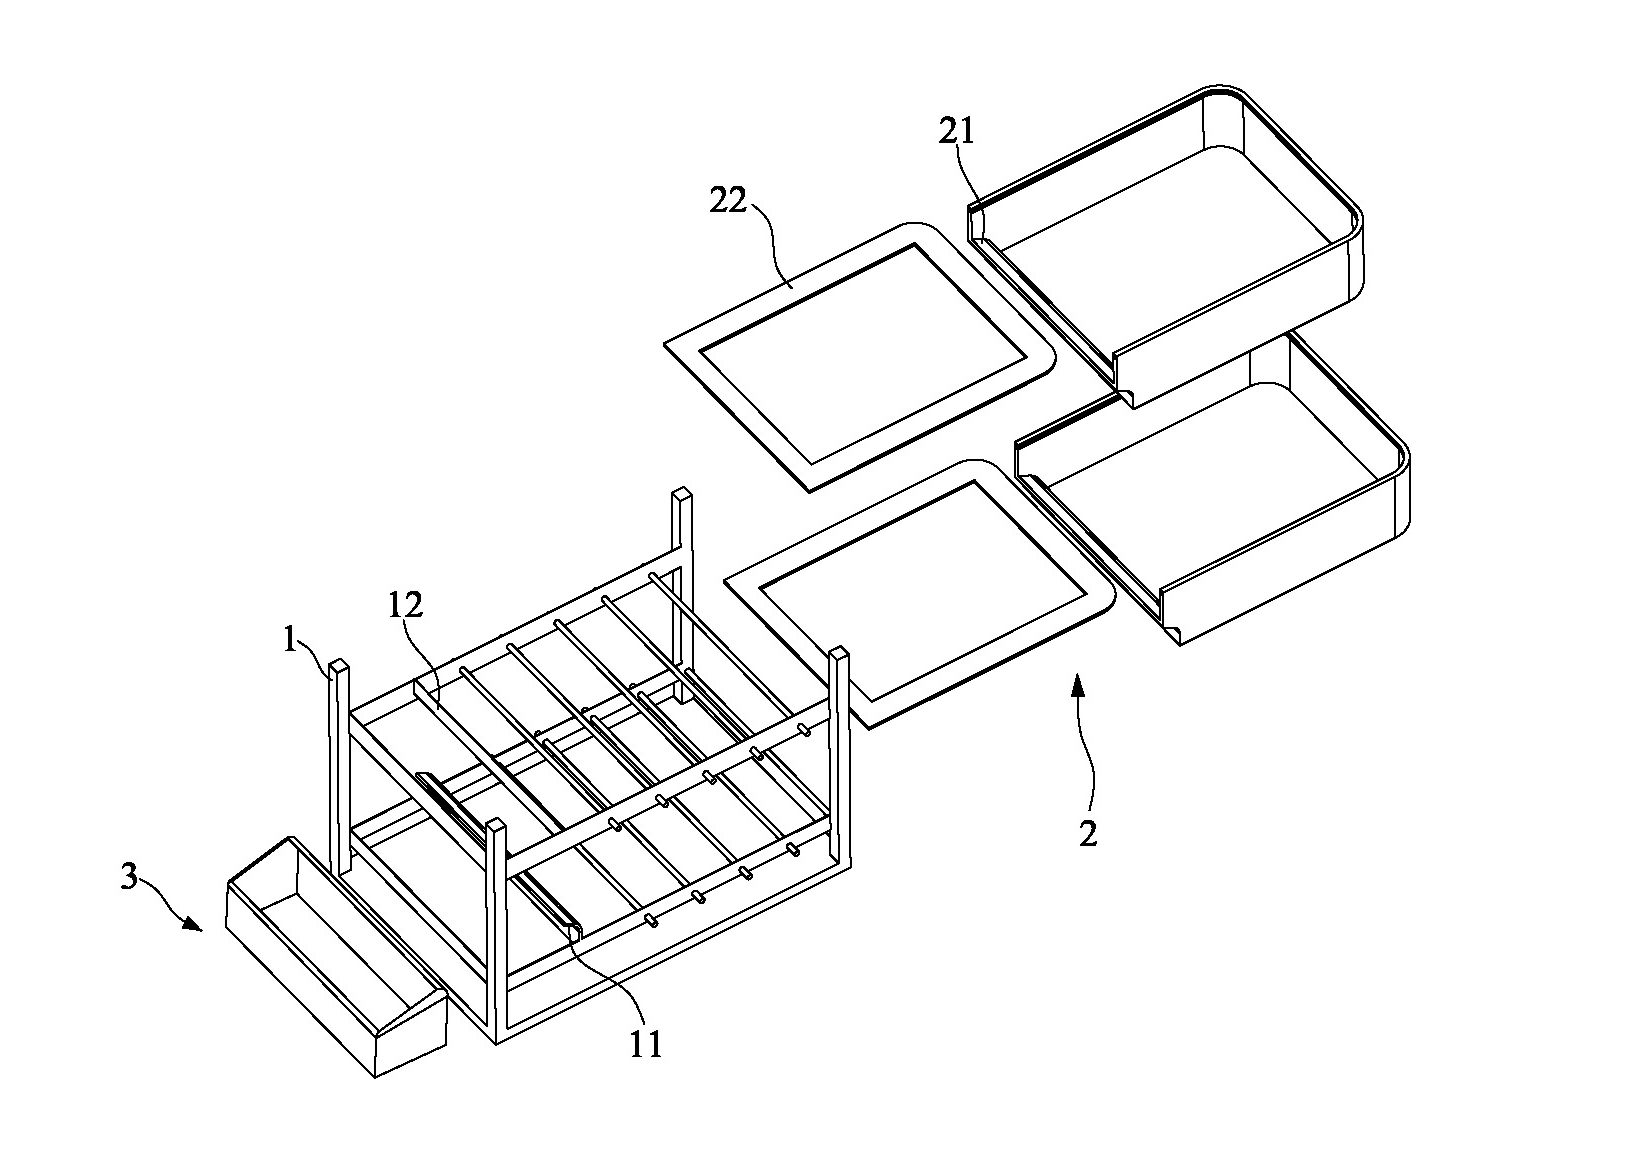 Maggot culture apparatus and large-scale maggot culture system